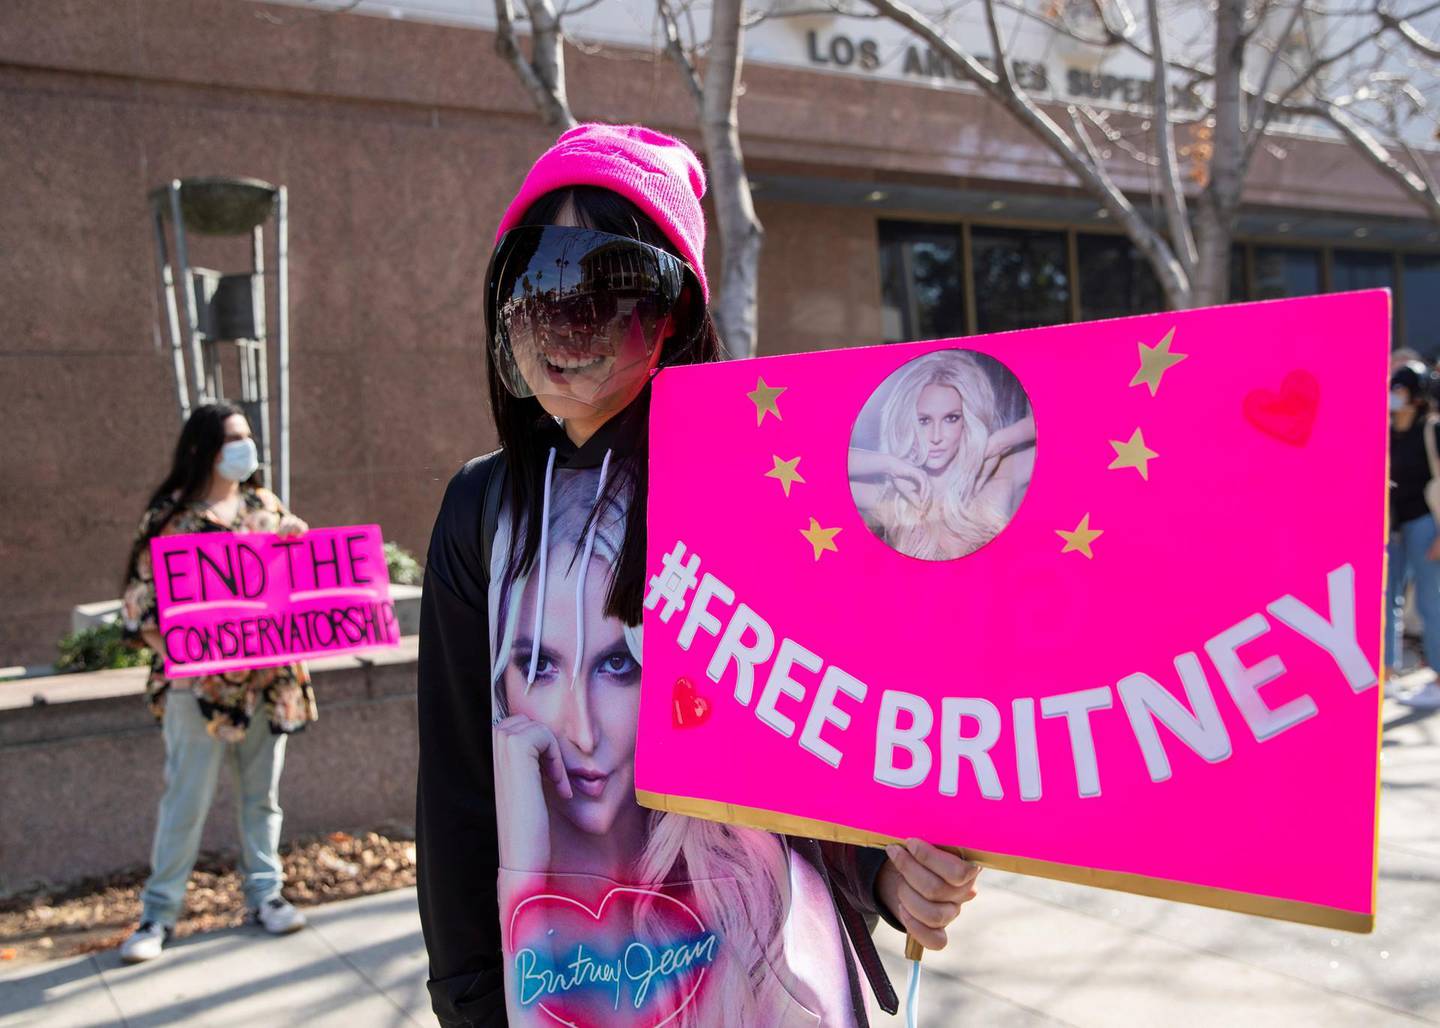 Supporters of singer Britney Spears gather outside a courthouse as a judge hears the singer's temporary conservatorship case during the outbreak of the coronavirus disease (COVID-19) in Los Angeles, California, U.S., February 11, 2021. REUTERS/Mike Blake     TPX IMAGES OF THE DAY